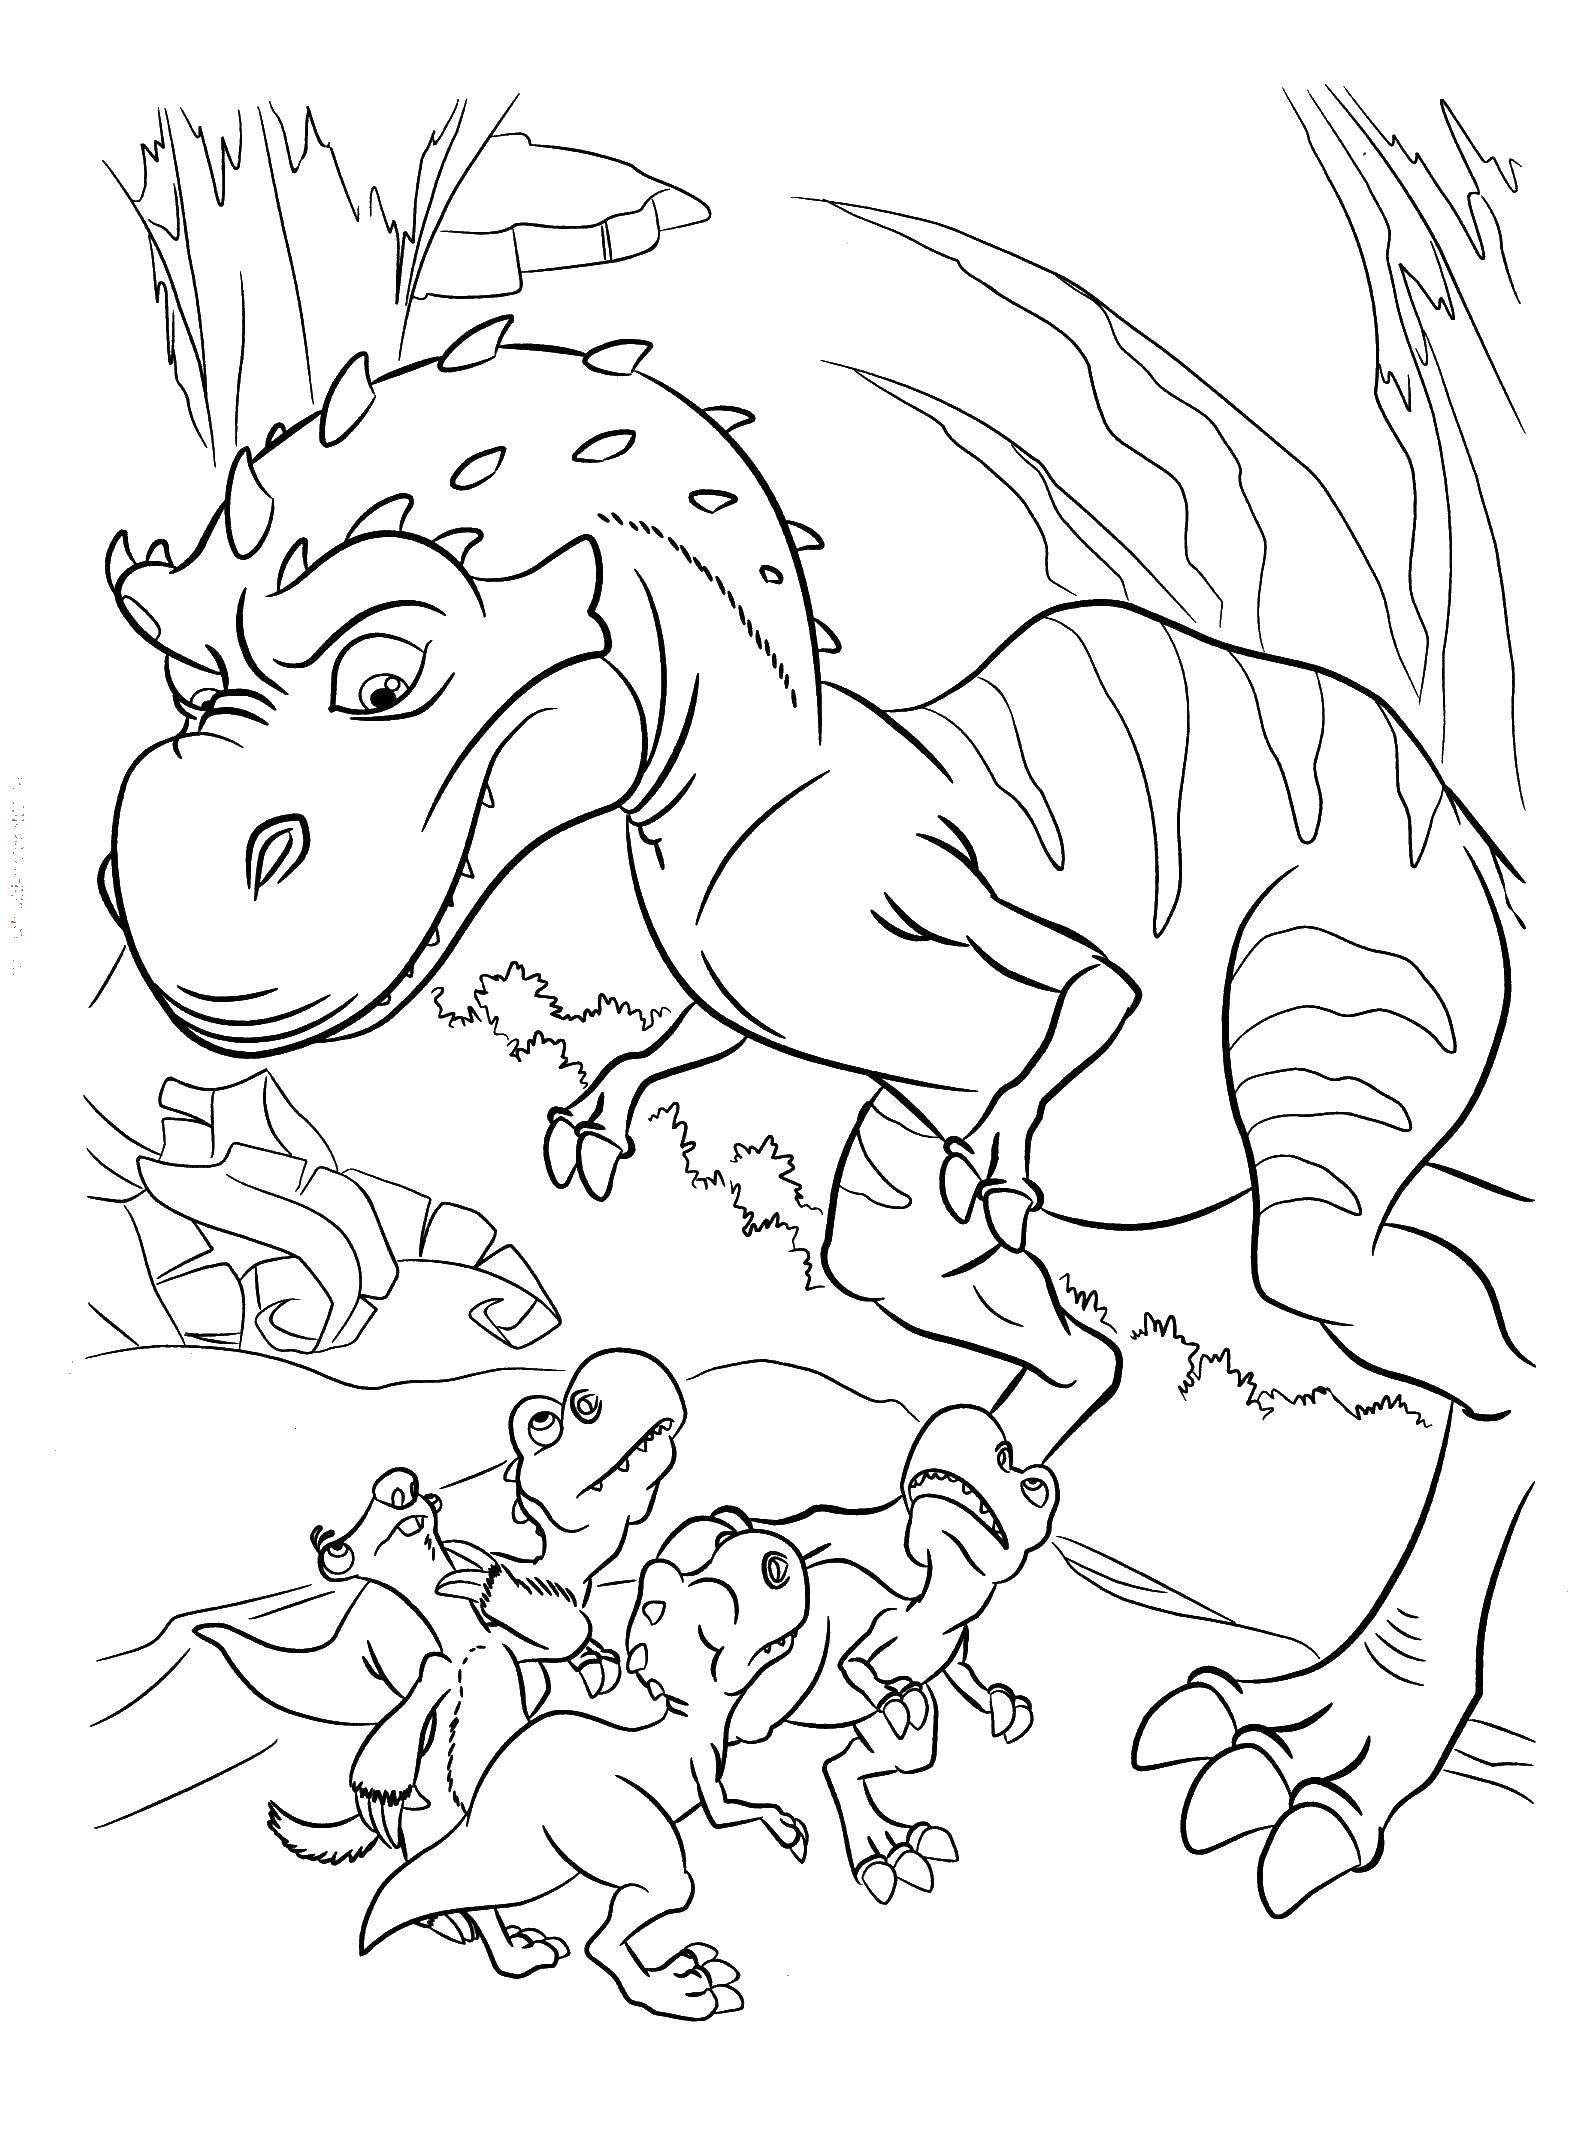 Coloring Tyrannosaurus Rex with cubs. Category ice age. Tags:  ice age, Sid, Manny.